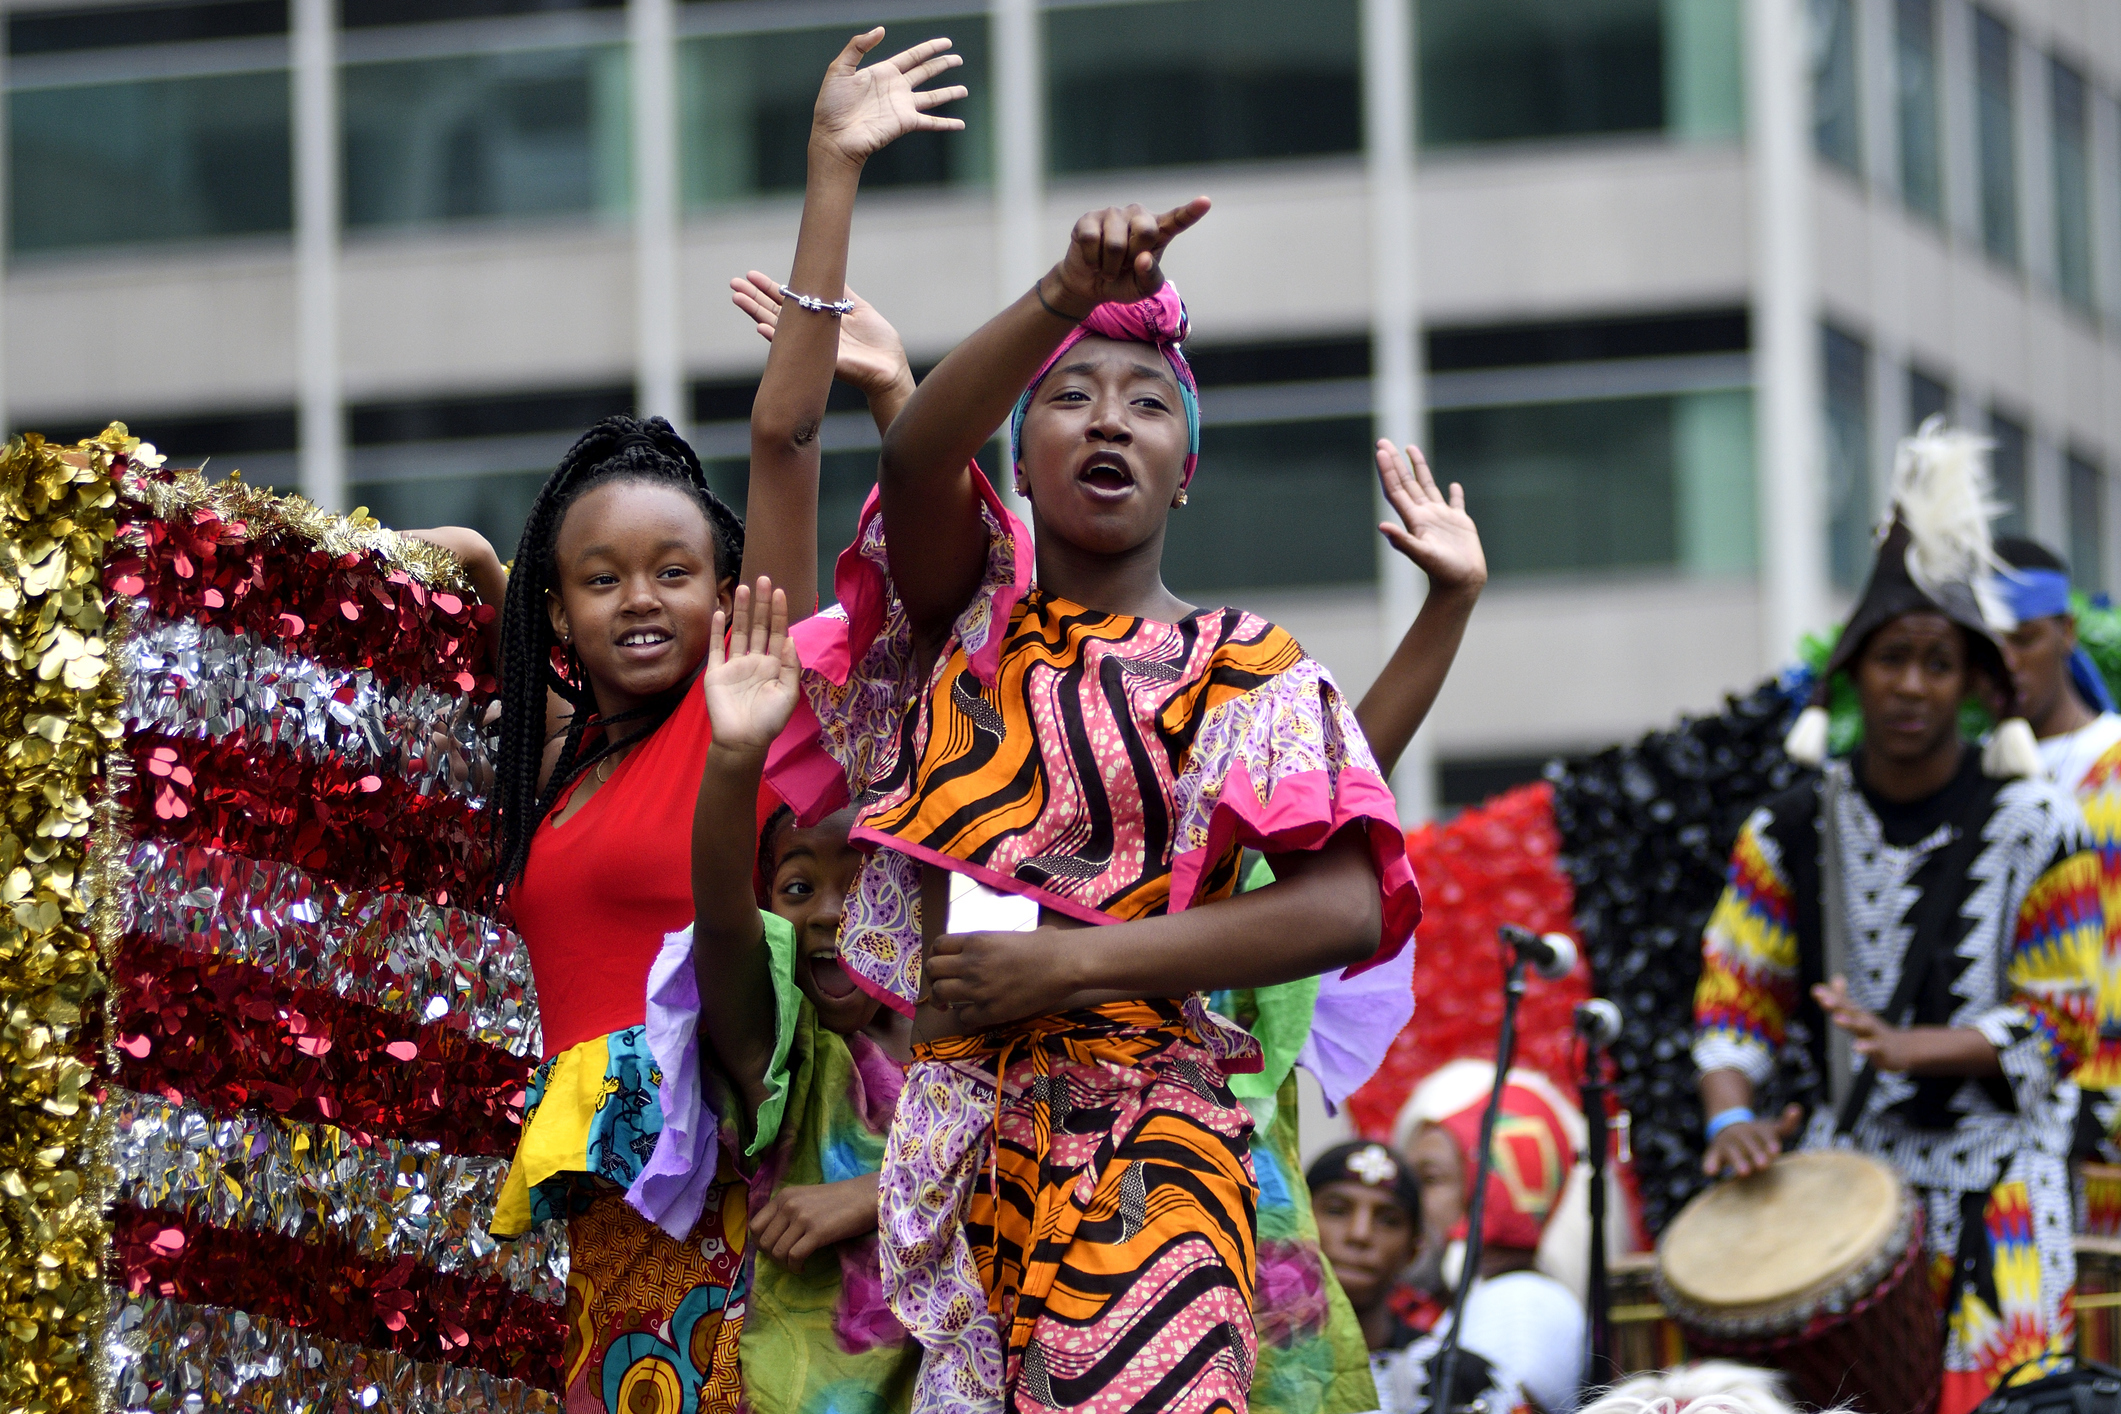 African immigrants celebrate their blended heritage on US Independence Day